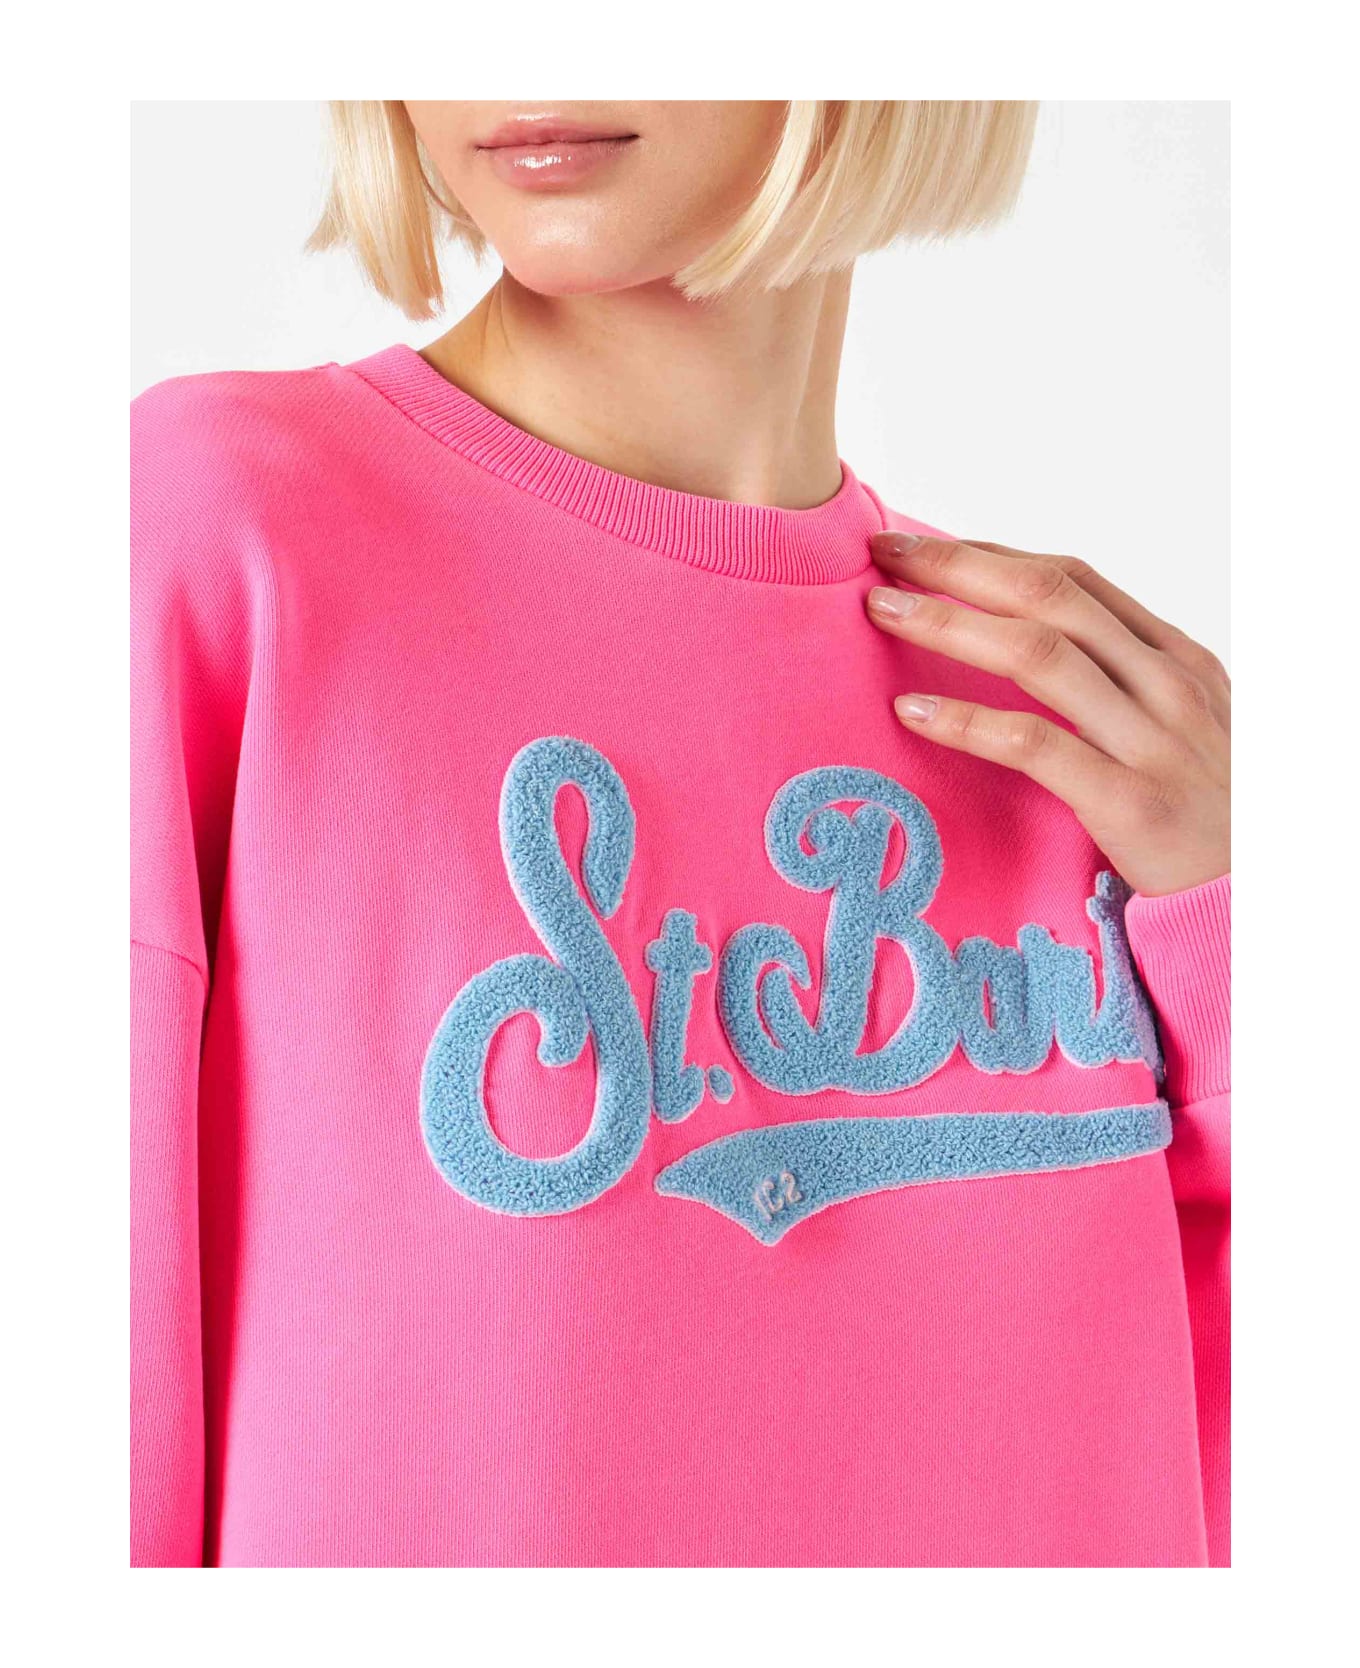 MC2 Saint Barth Woman Fluo Pink Sweatshirt With St. Barth Embroidery - PINK